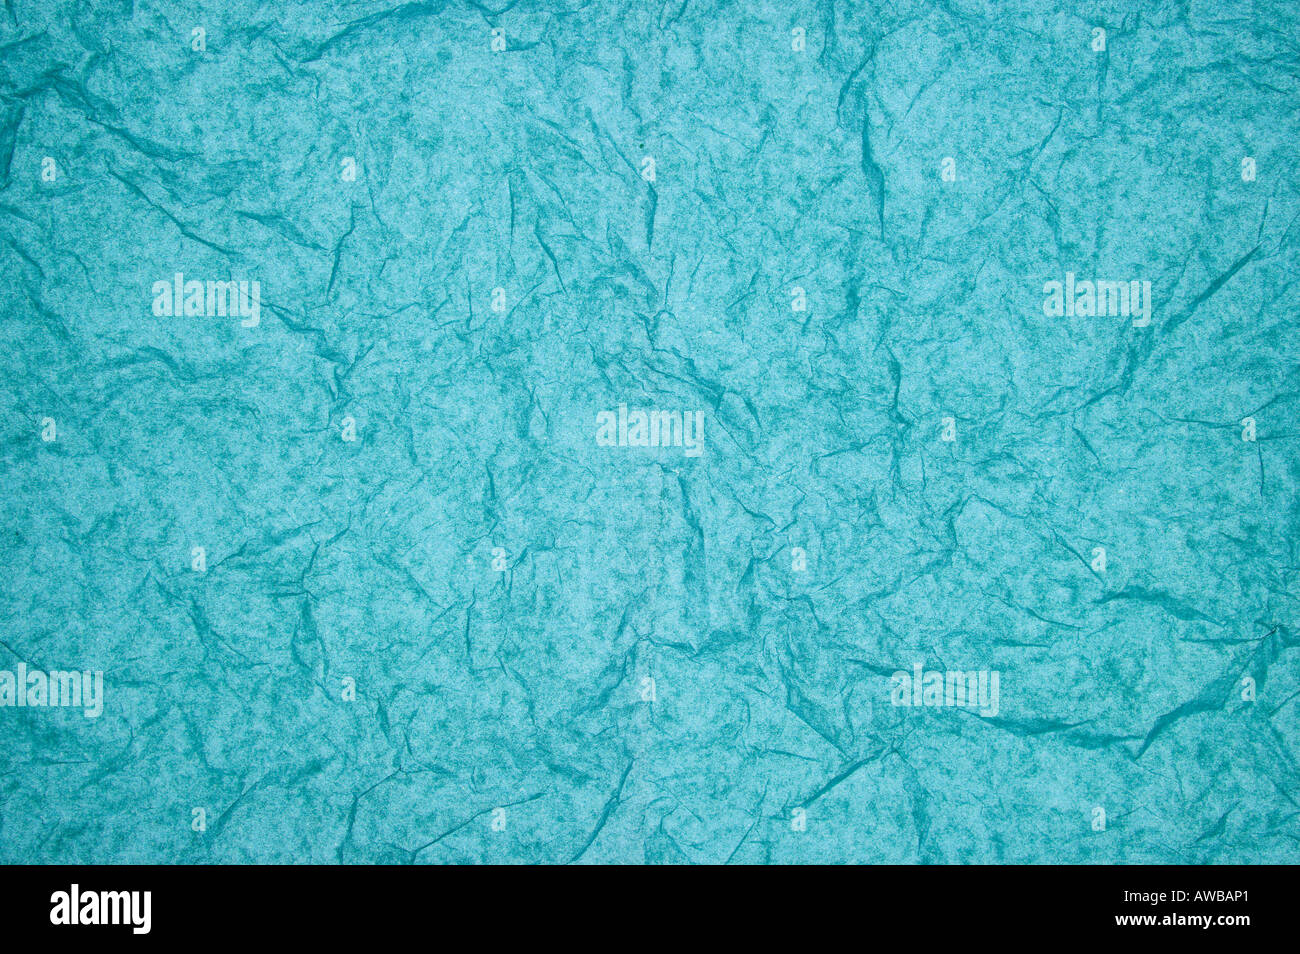 ABSTRACT RANDOM BACKGROUND OF CREASED CRUMPLED TURQUOISE BLUE TISSUE PAPER Stock Photo